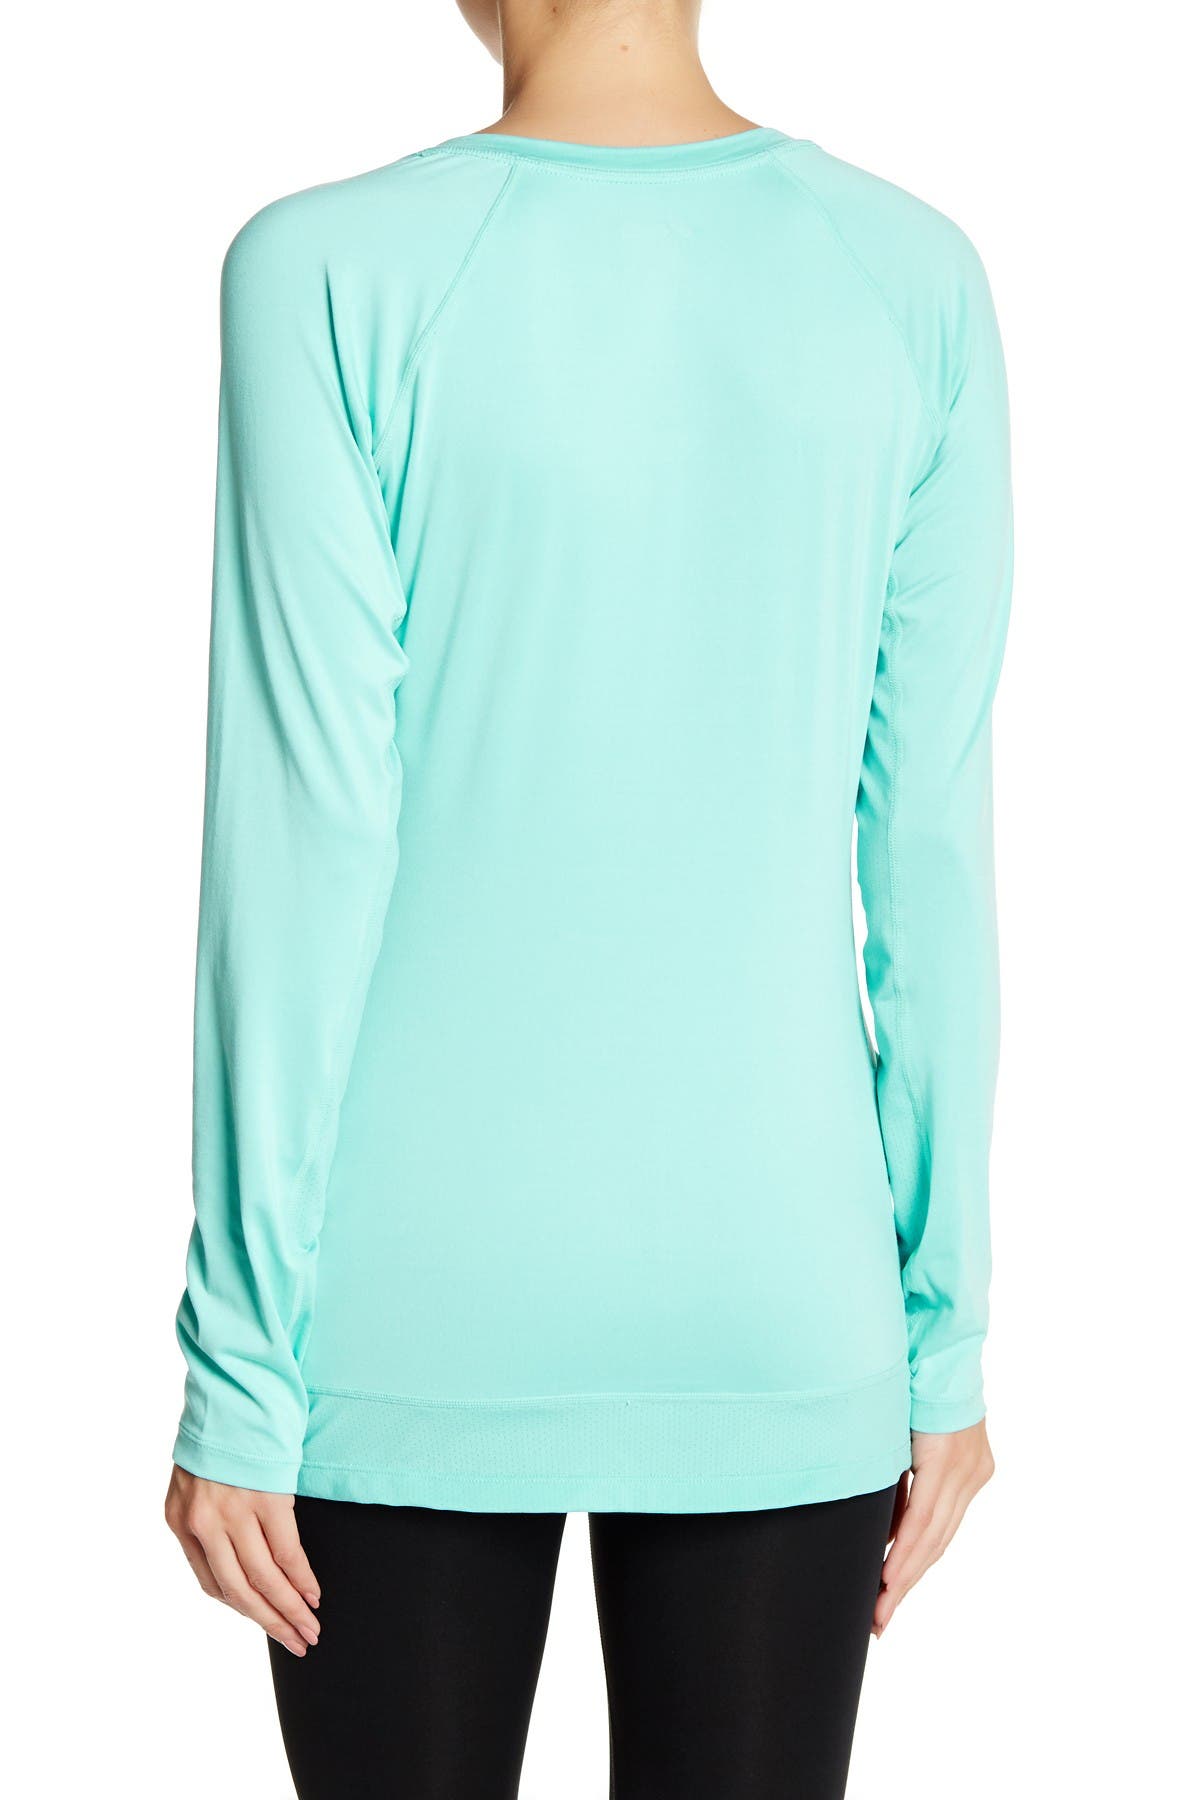 Asics Asx Dry Long Sleeve Shirt In Turquoise